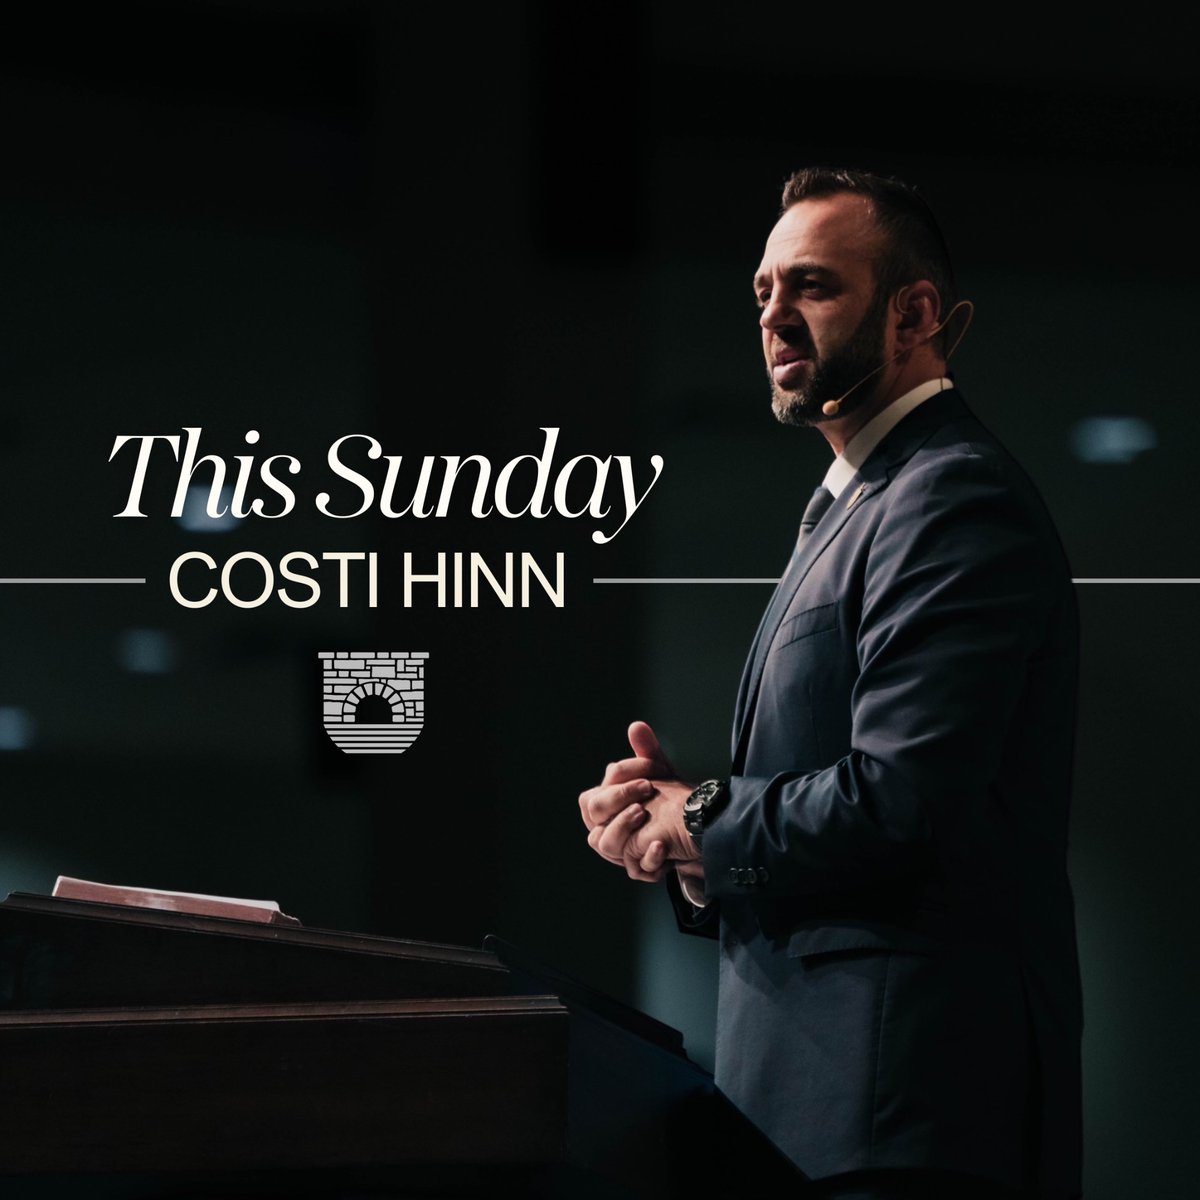 Looking forward to having my brother Costi Hinn preach to our Stonebridge Bible Church family tomorrow in Franklin, Tn! Services 9:00 & 10:45 AM @forthegospelmin